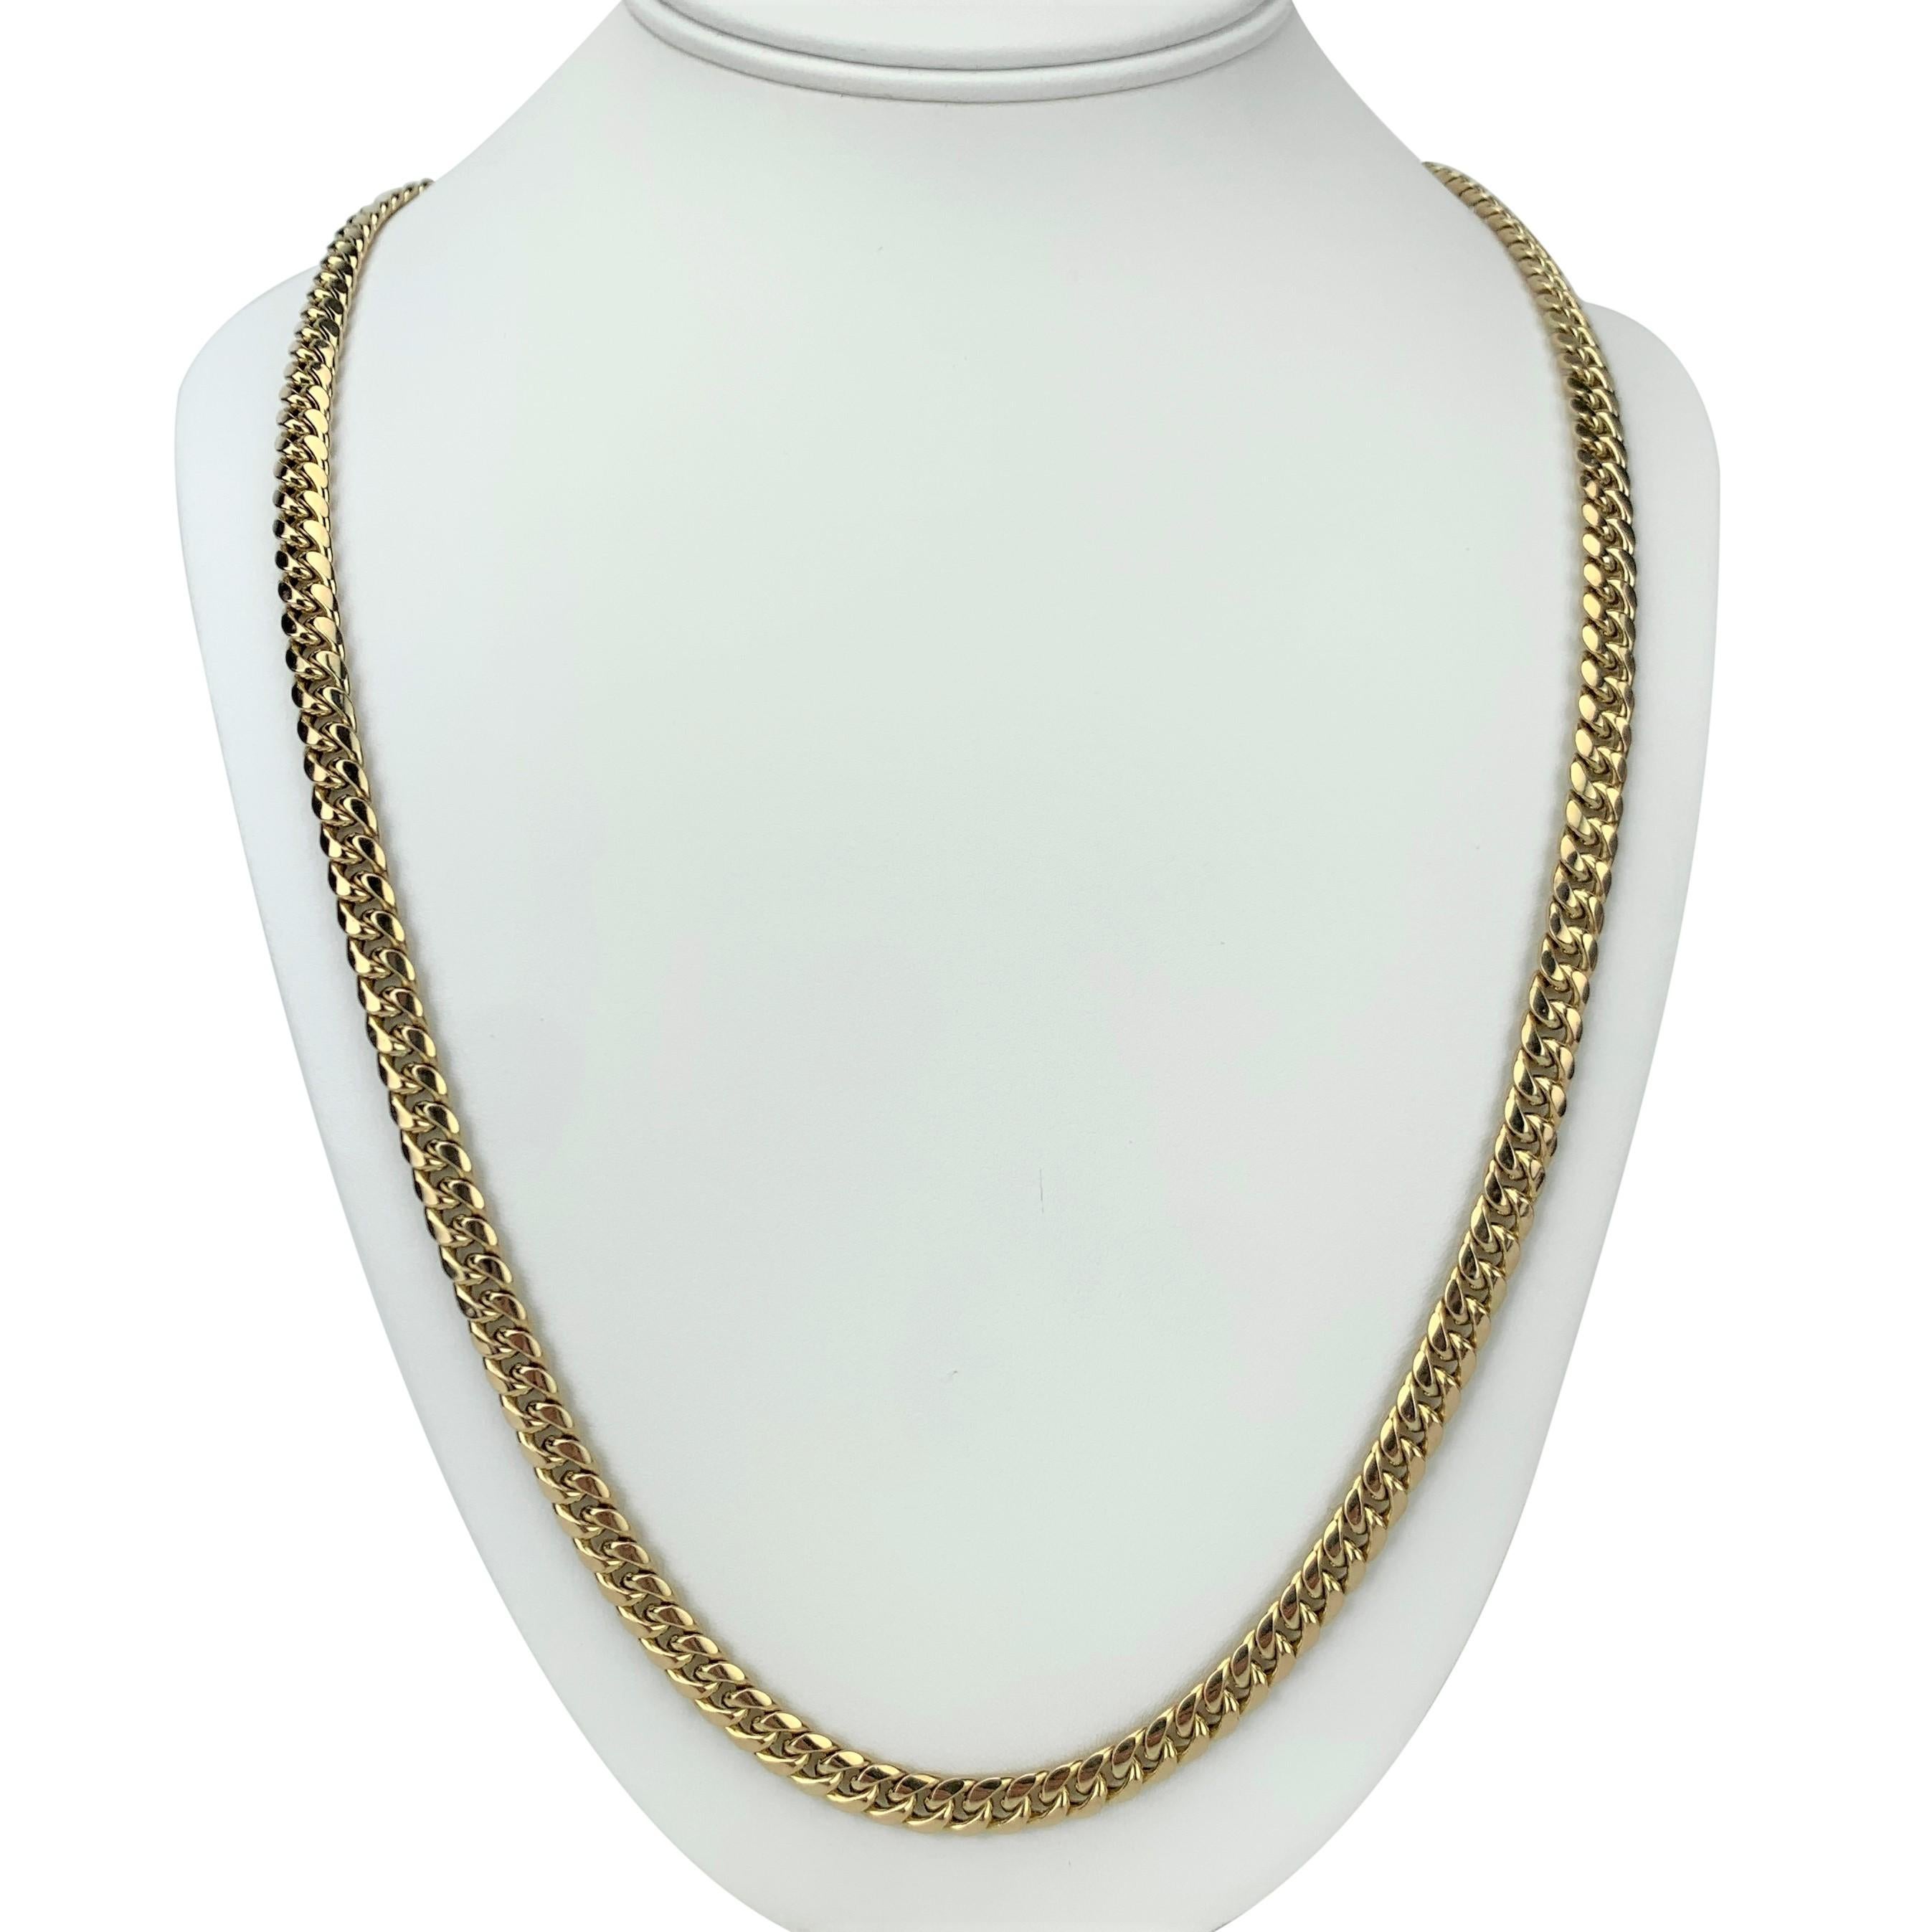 10k Yellow Gold 33.3g Hollow 6.5mm Cuban Curb Link Chain Necklace 30